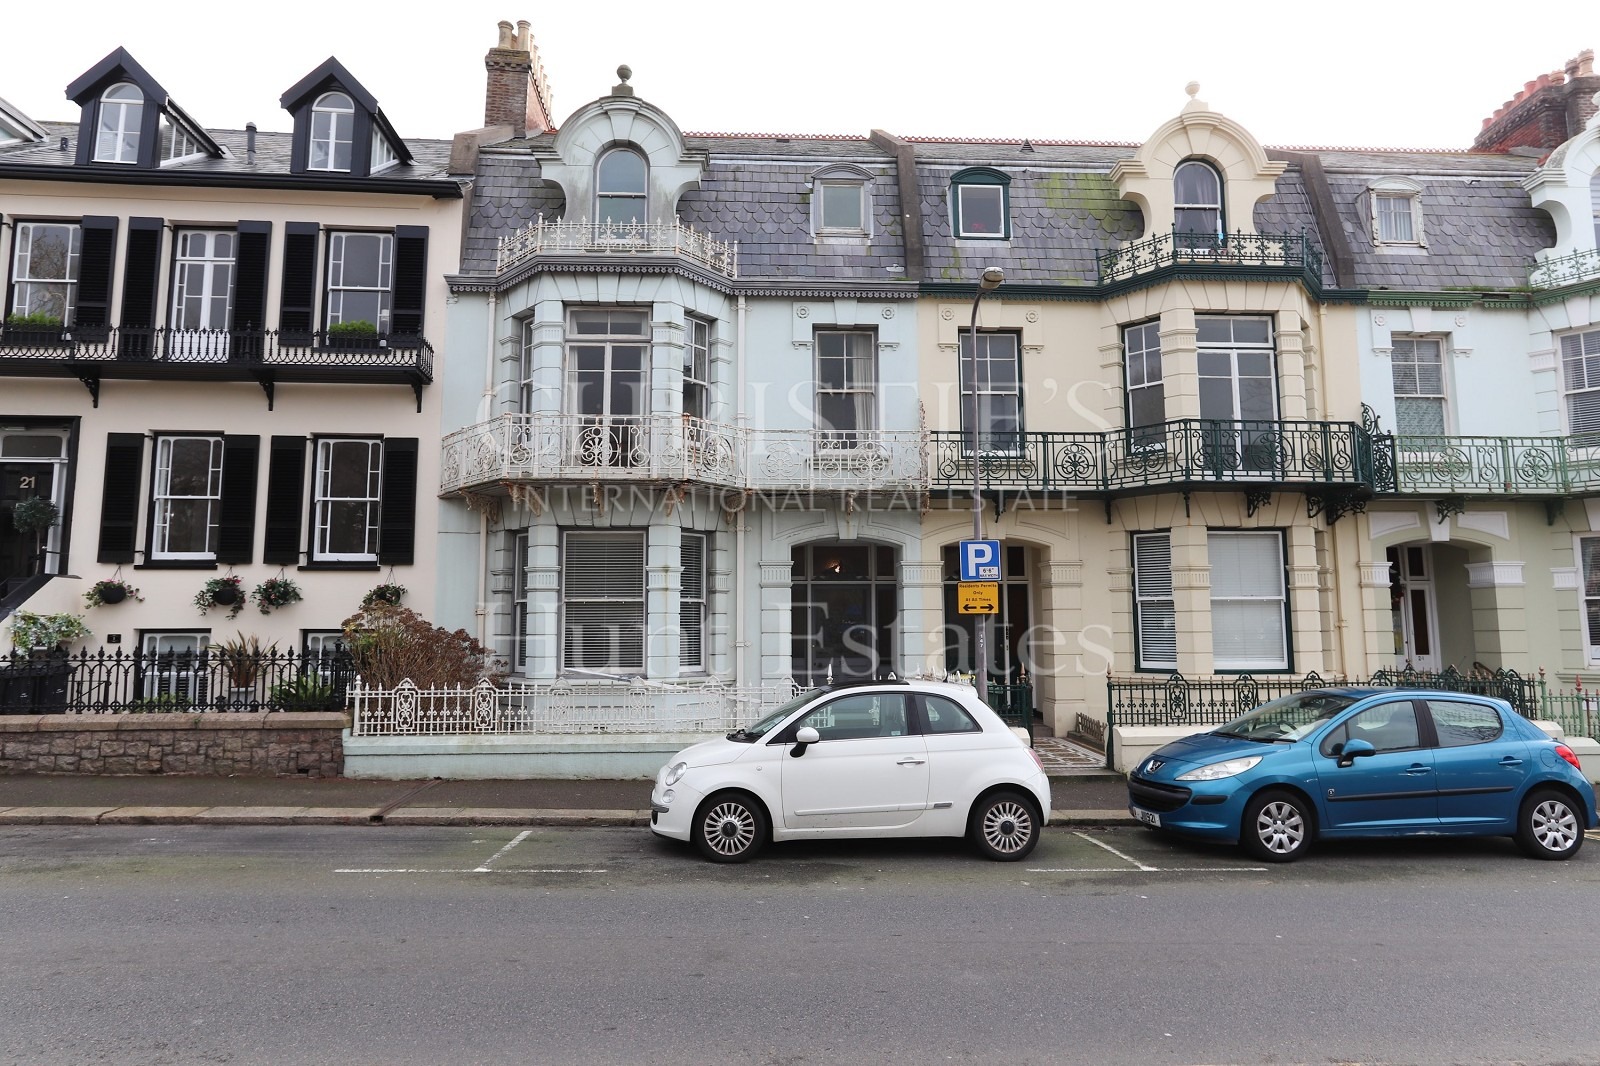 dood Muf toewijzing 19TH CENTURY TOWN HOUSE St Helier : a Luxury Single Family Home for Sale -  , St Helier Property ID:950 | Christie's International Real Estate